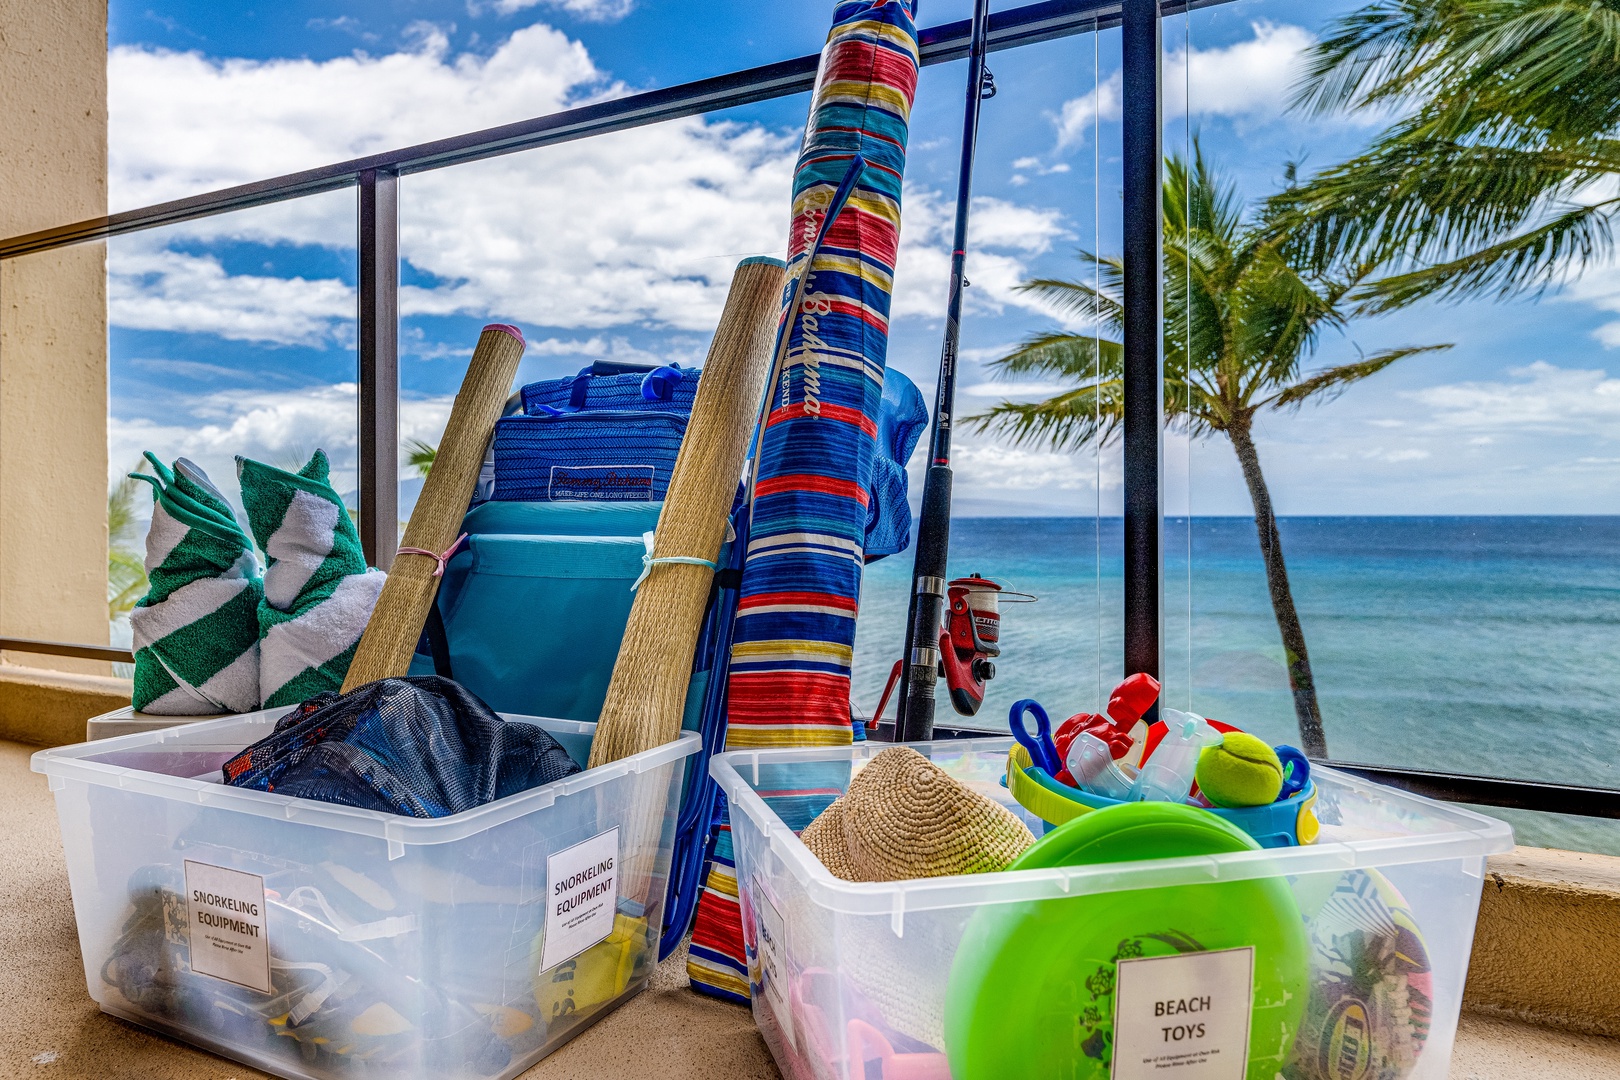 Make the most of the beach equipment provided for guests' enjoyment